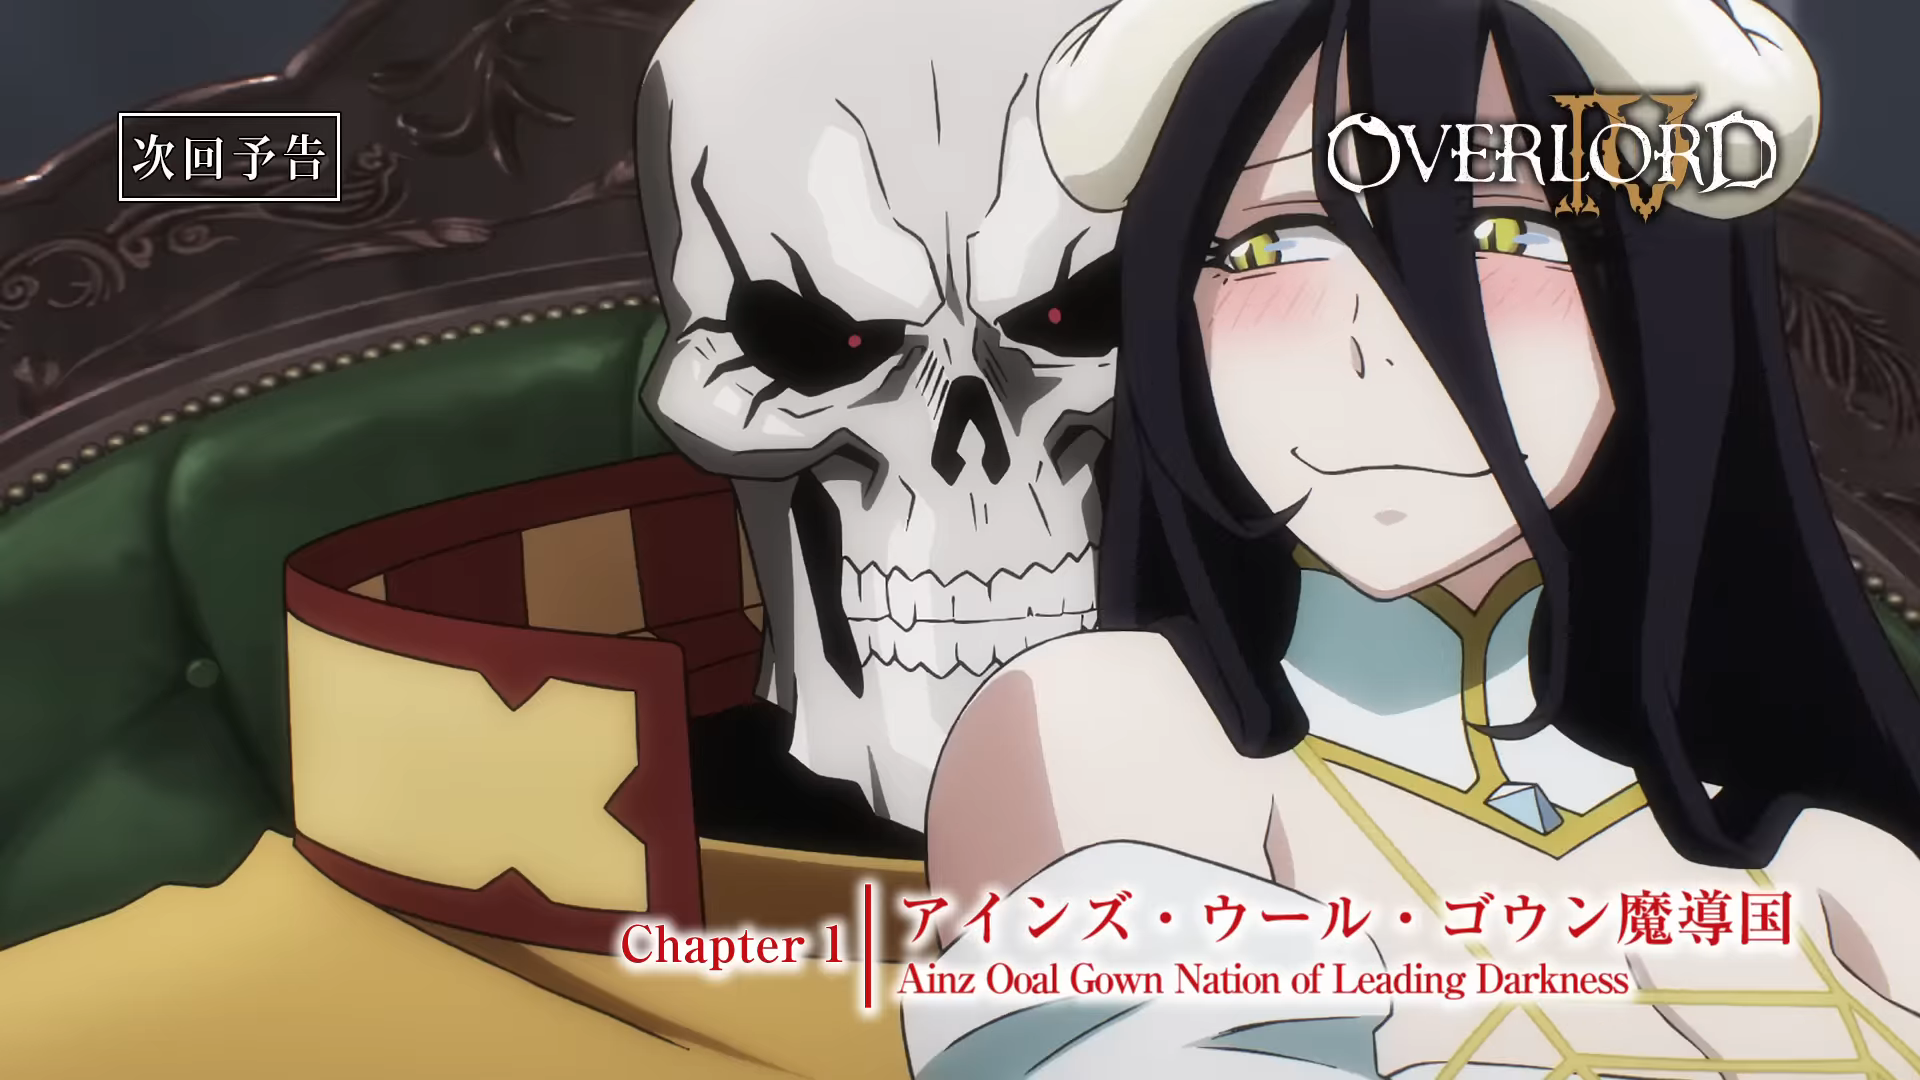 Overlord IV Season 4 Episode 13  Anime Review  DoubleSama